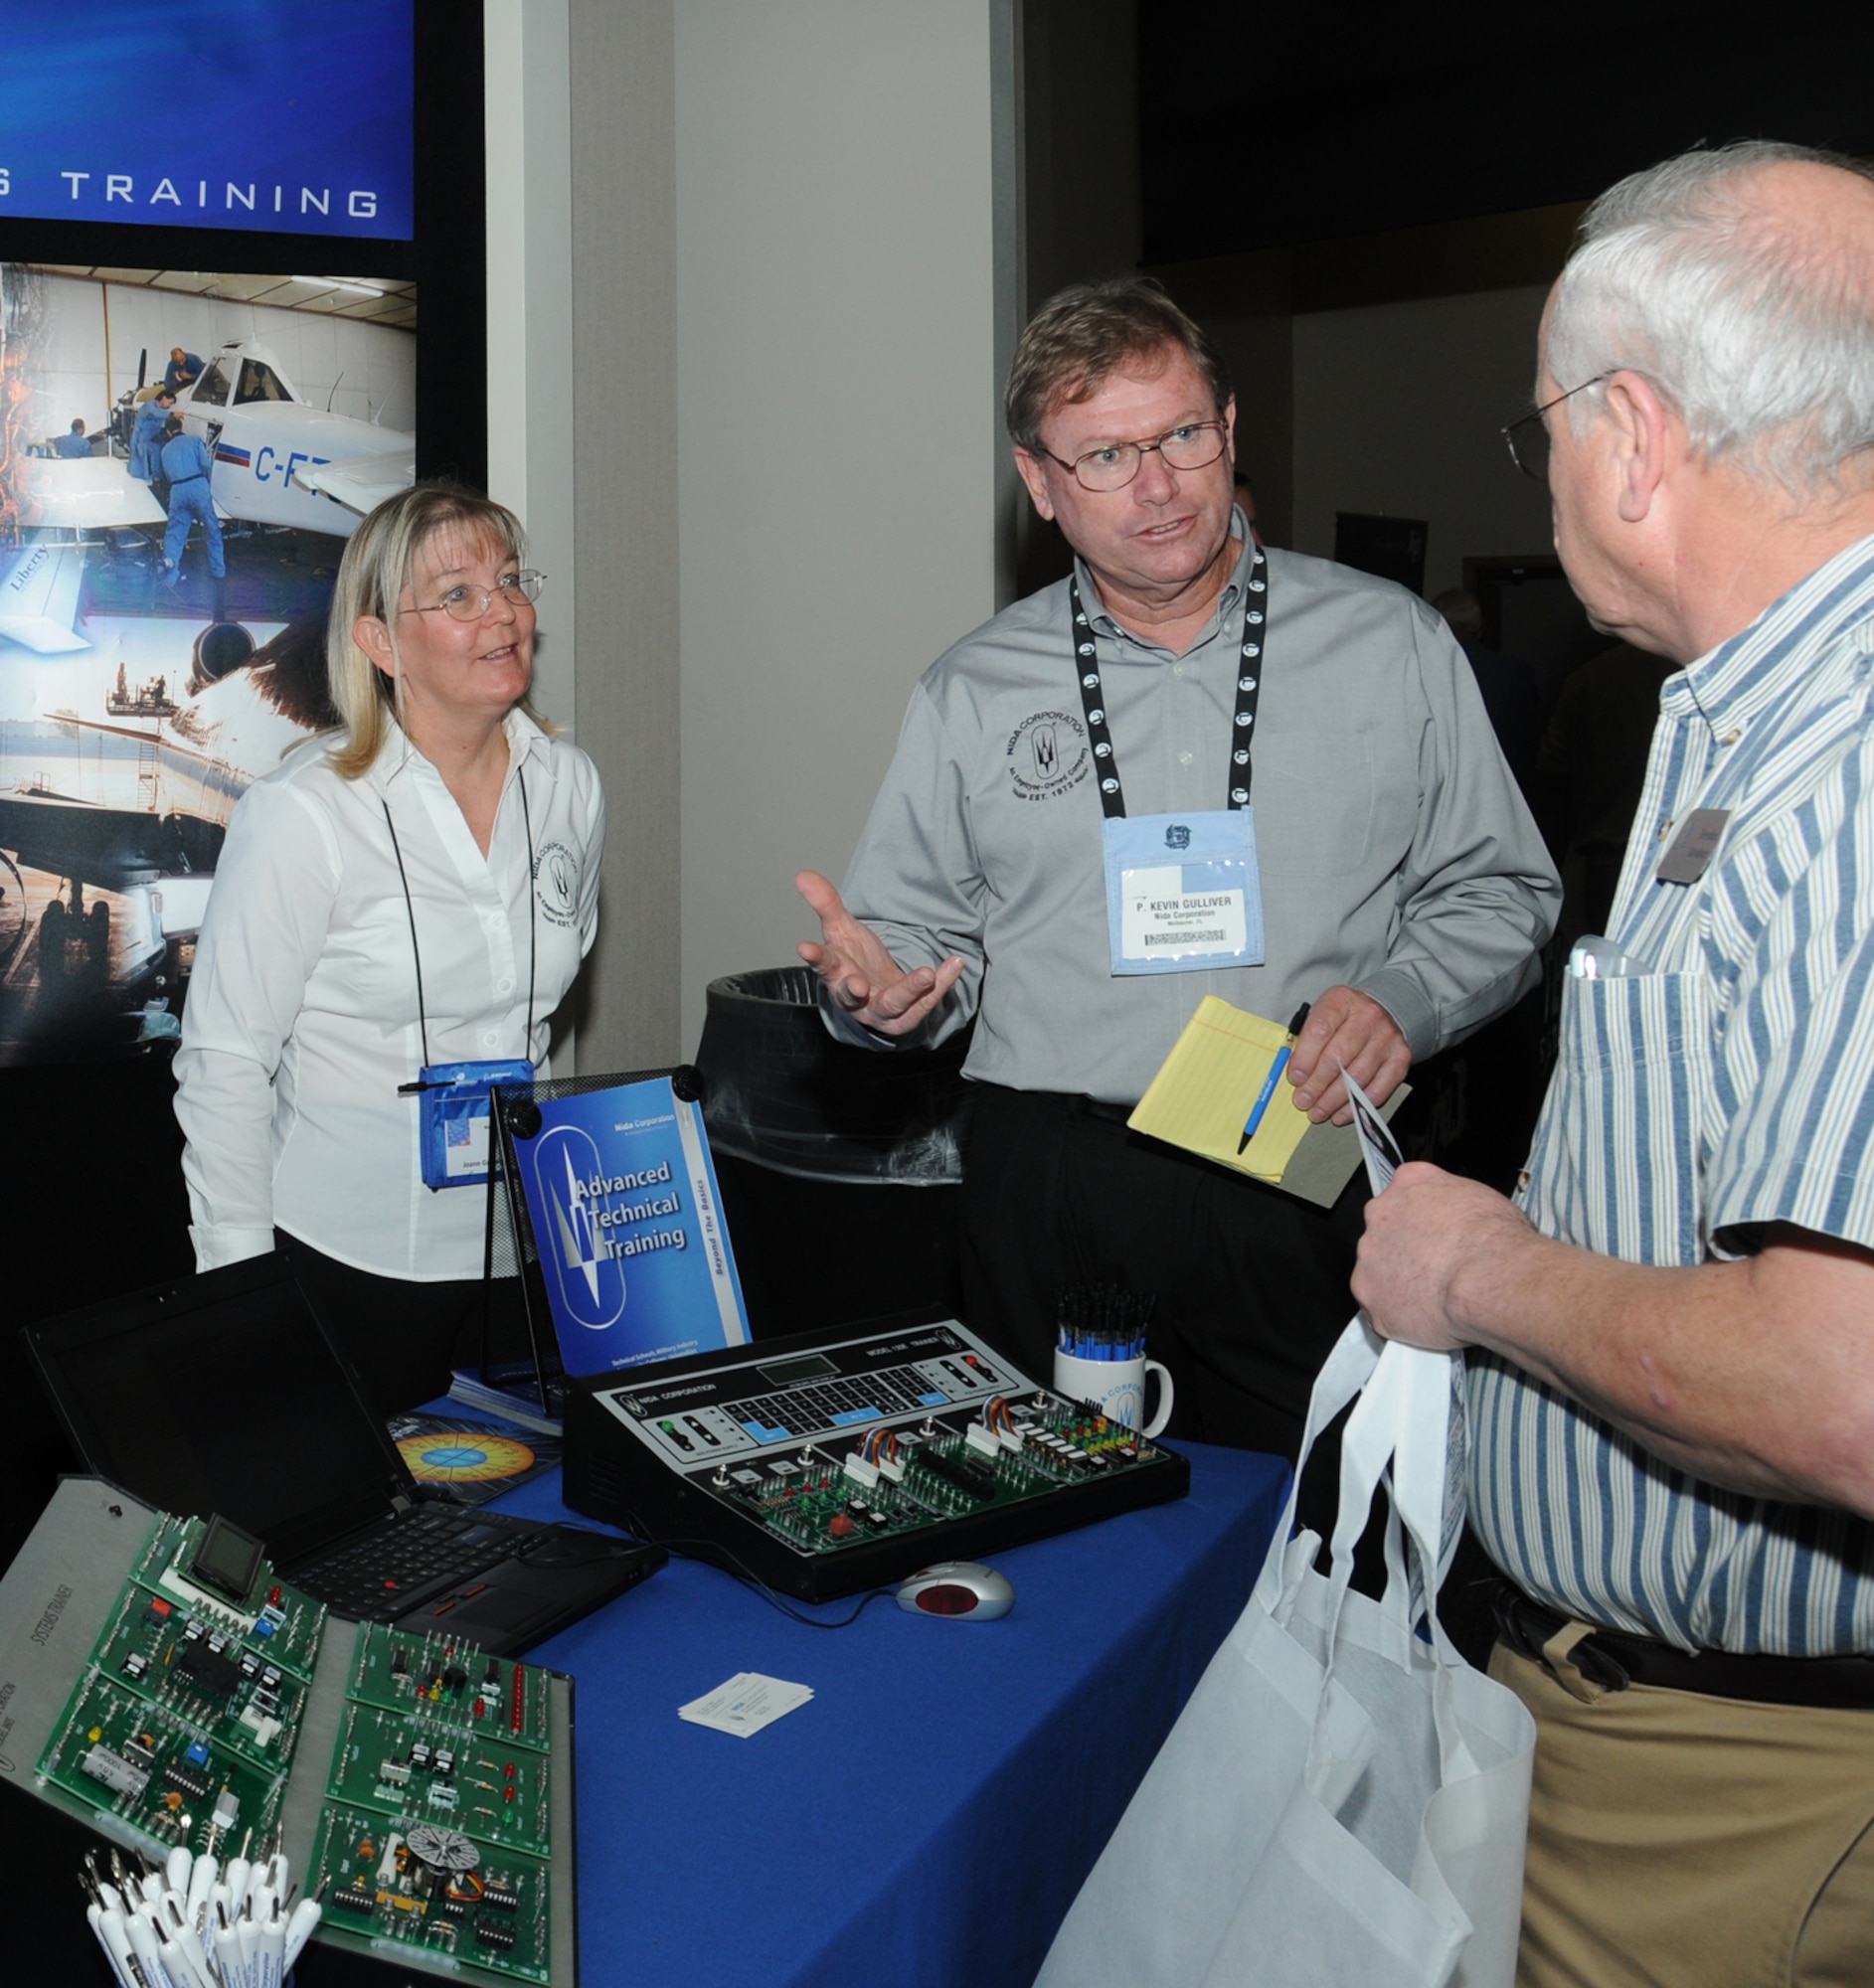 Joann and Kevin Gulliver, NIDA Corporation, provide information about systems trainers used for basic and advanced electronics to Brendan Davidson, 335th Training Squadron, during a technology expo Jan. 9, 2012, at the Roberts Consolidated Aircraft Maintenance Facility, Keesler Air Force Base, Miss.  The 17th annual free expo, hosted by the 81st Training Support Squadron, featured more than 40 exhibitors.  (U.S. Air Force photo by Kemberly Groue)